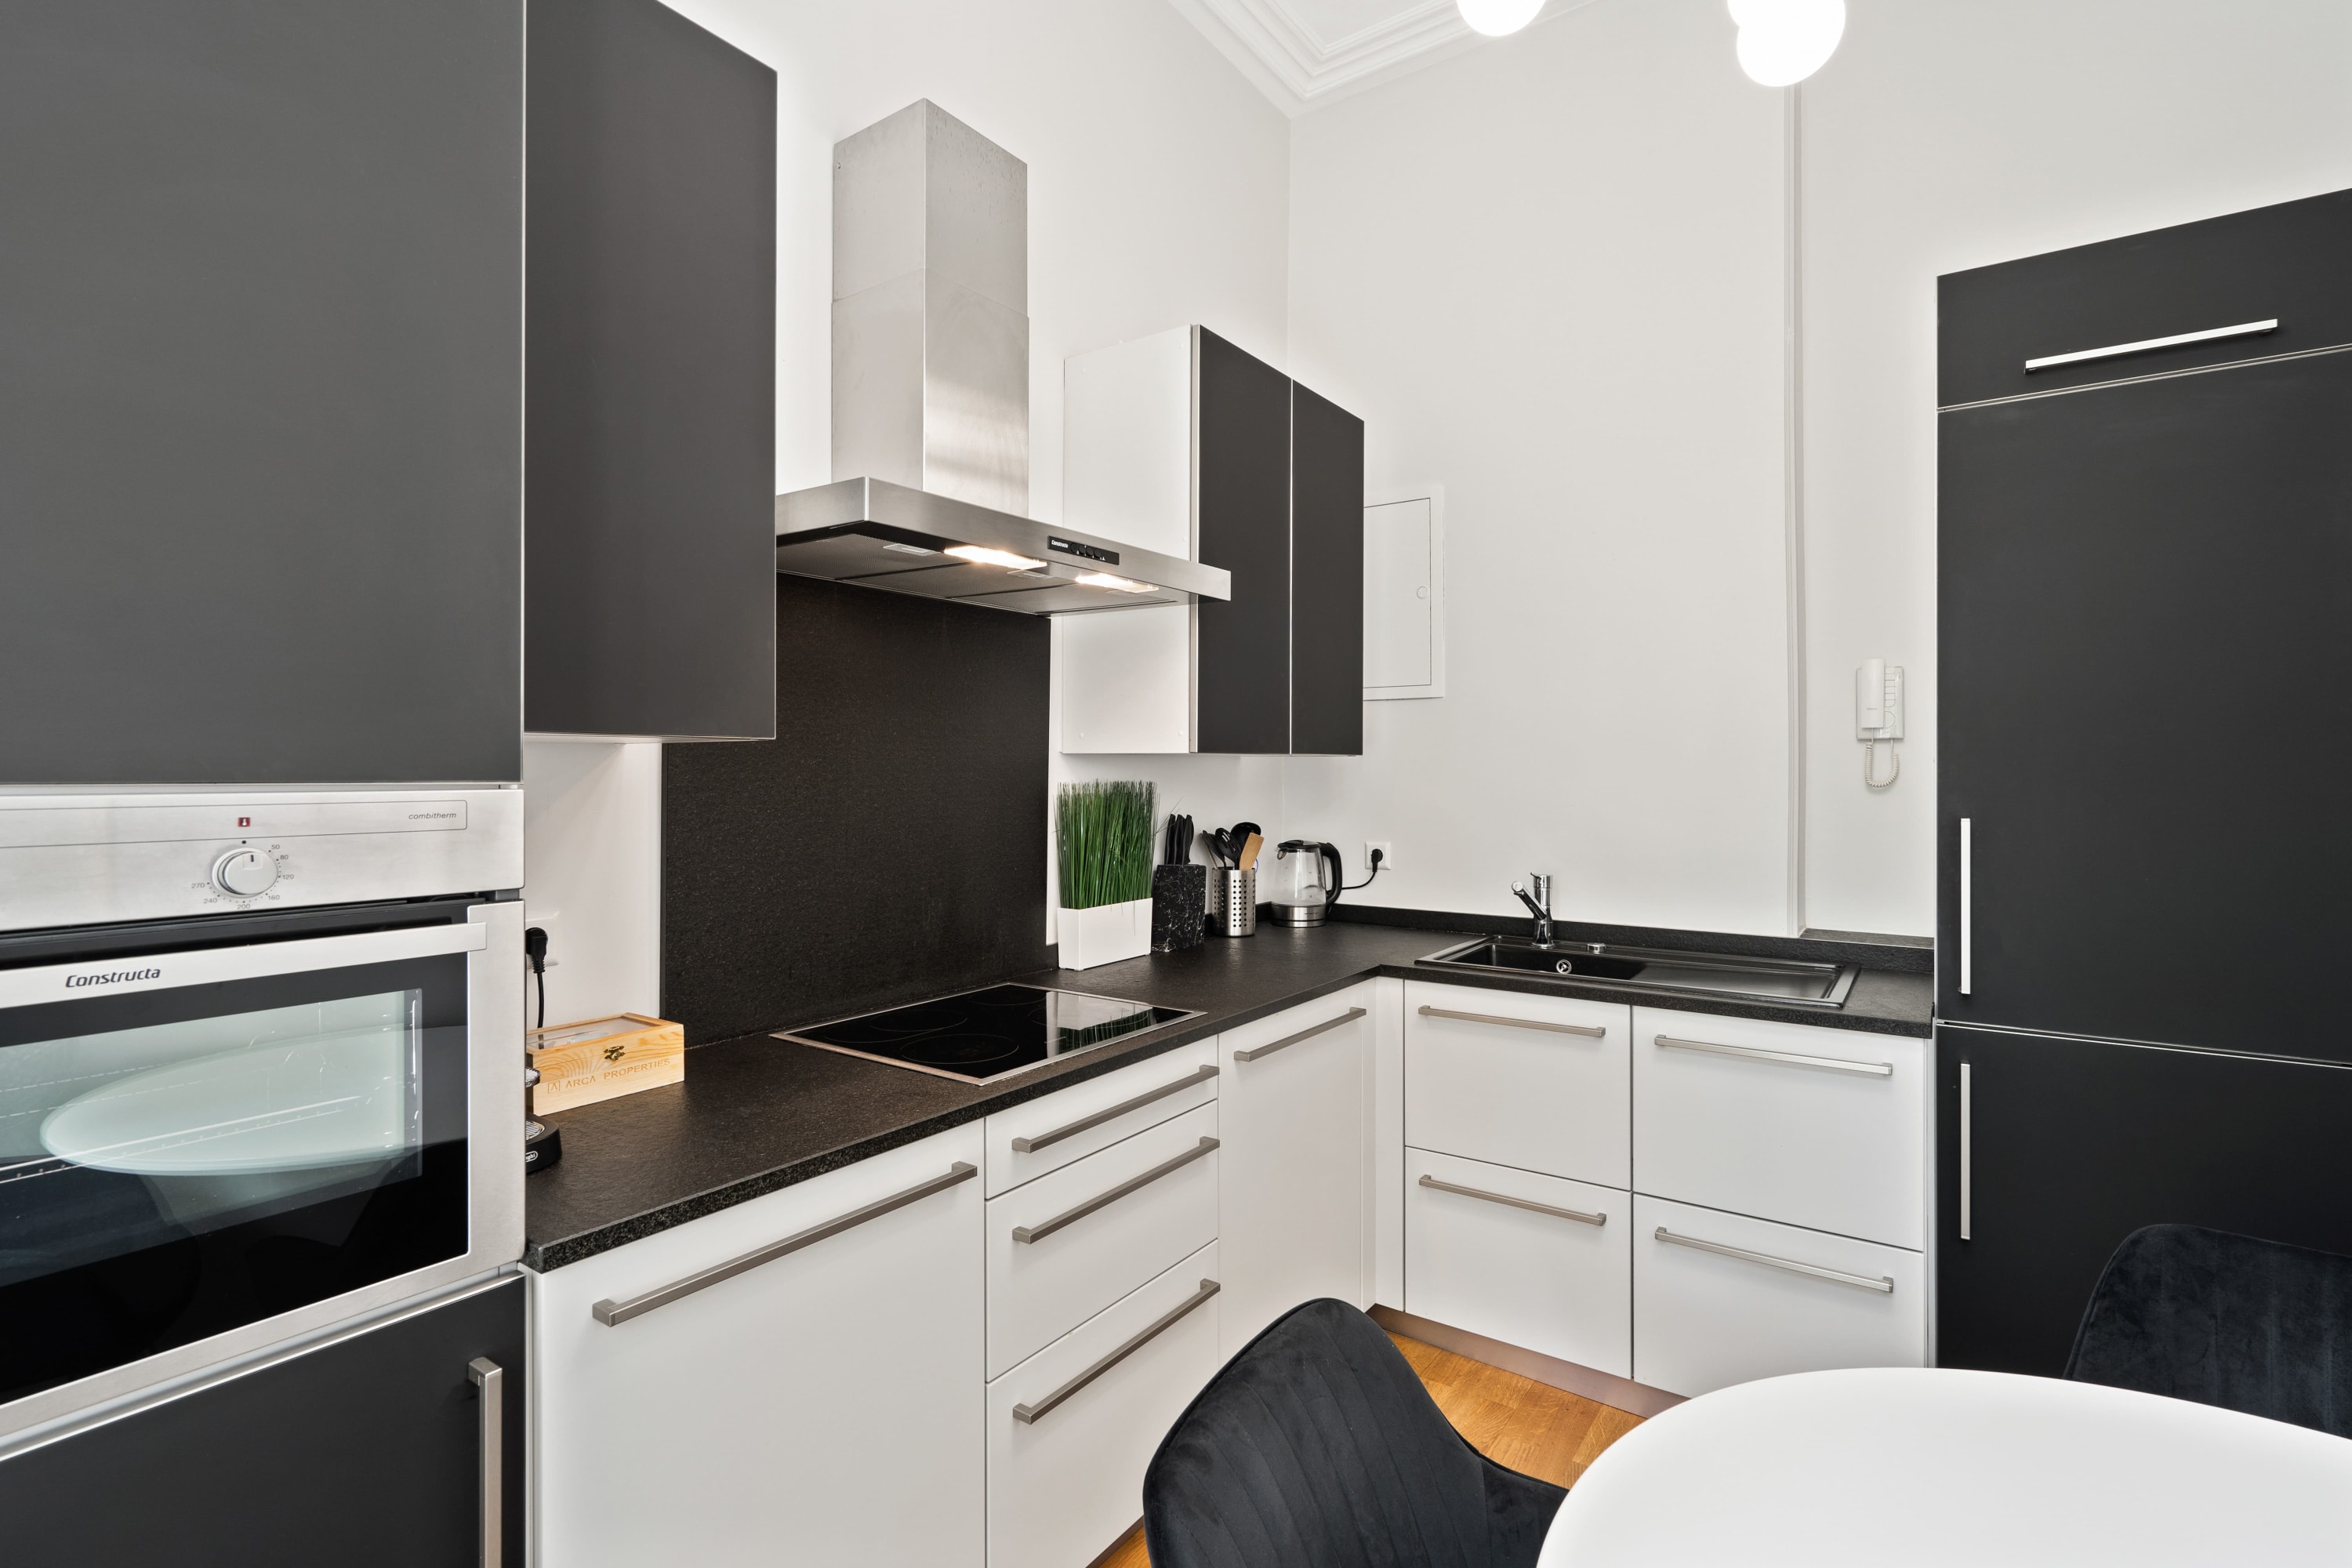 Our modern kitchen: the heart of the home, for quick snacks or gourmet dinners. Direct bookings: www.arcaproperties.lu